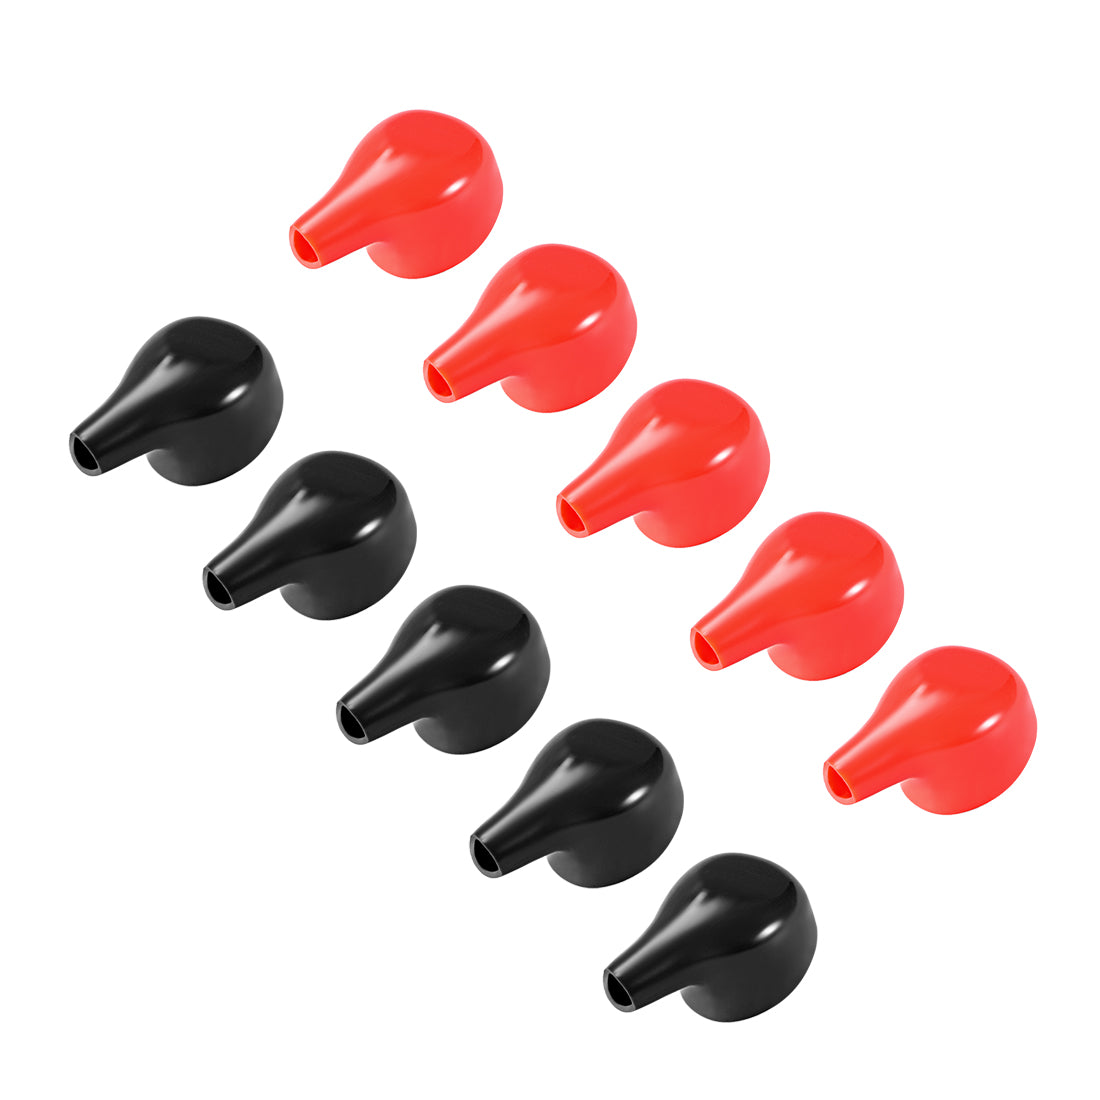 uxcell Uxcell Battery Terminal Insulating Rubber Protector Covers for 28mm Terminal 8mm Cable Red Black 5 Pairs